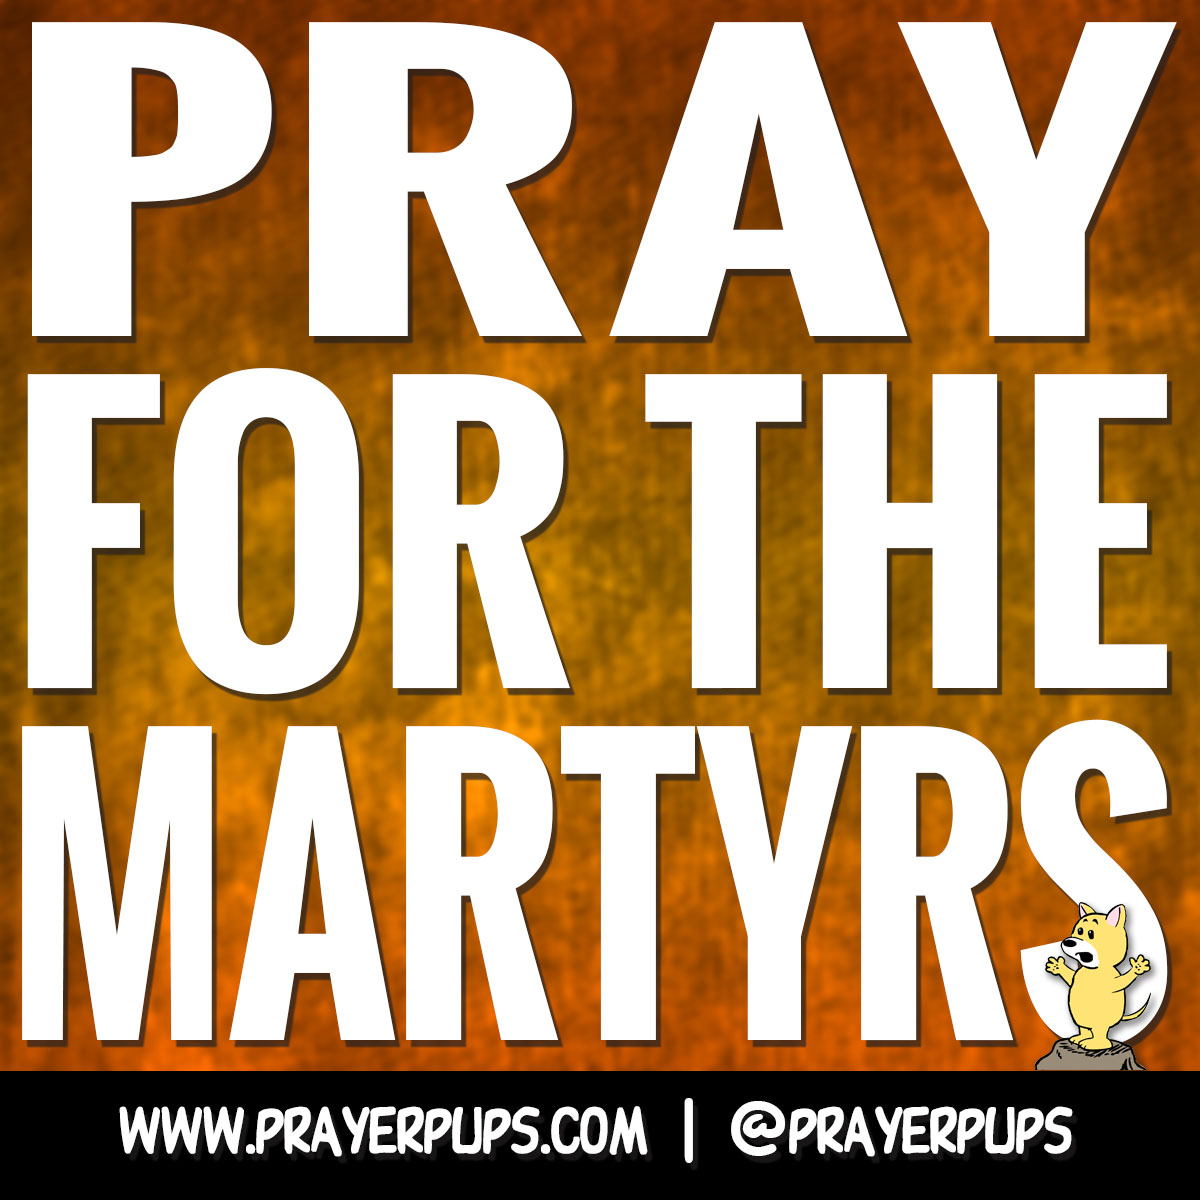 Pray for the martyrs